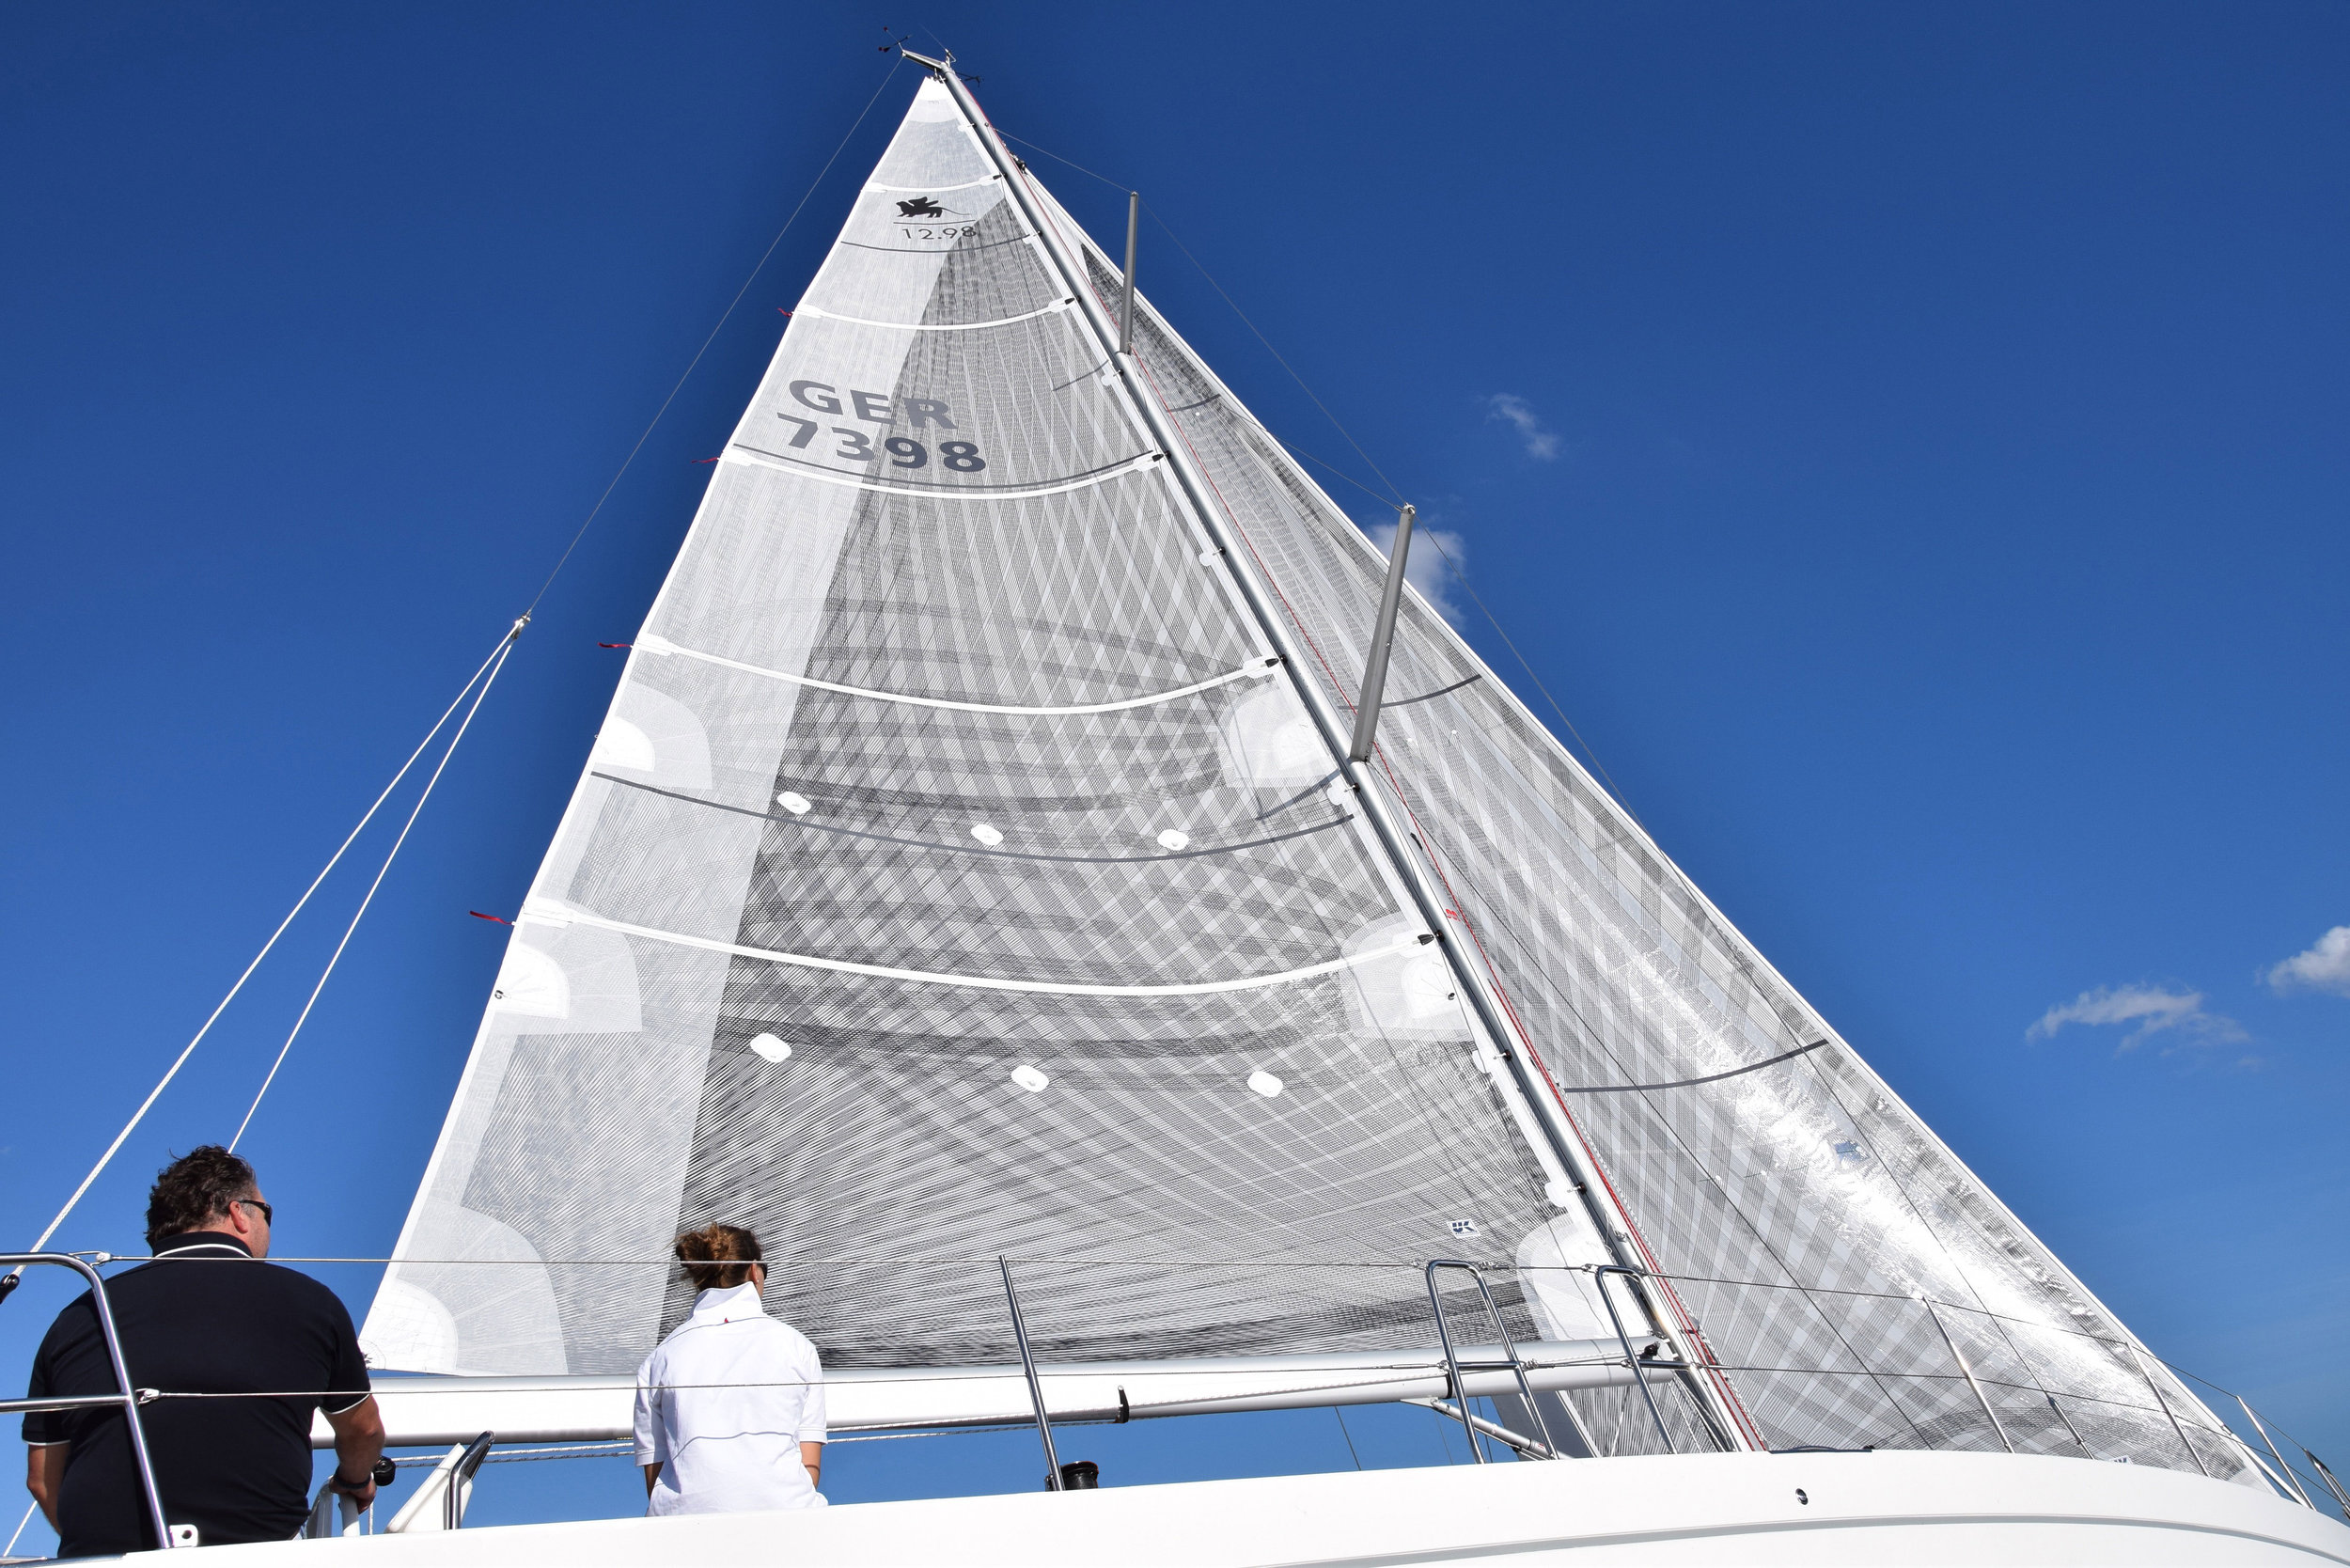 An Italia 12.98 with X-Drive carbon full-batten mainsail and roller/furling genoa. The base laminate has a white taffeta on the side opposite the fibers, while the main has taffeta applied over the fibers on the leech for extra durability.